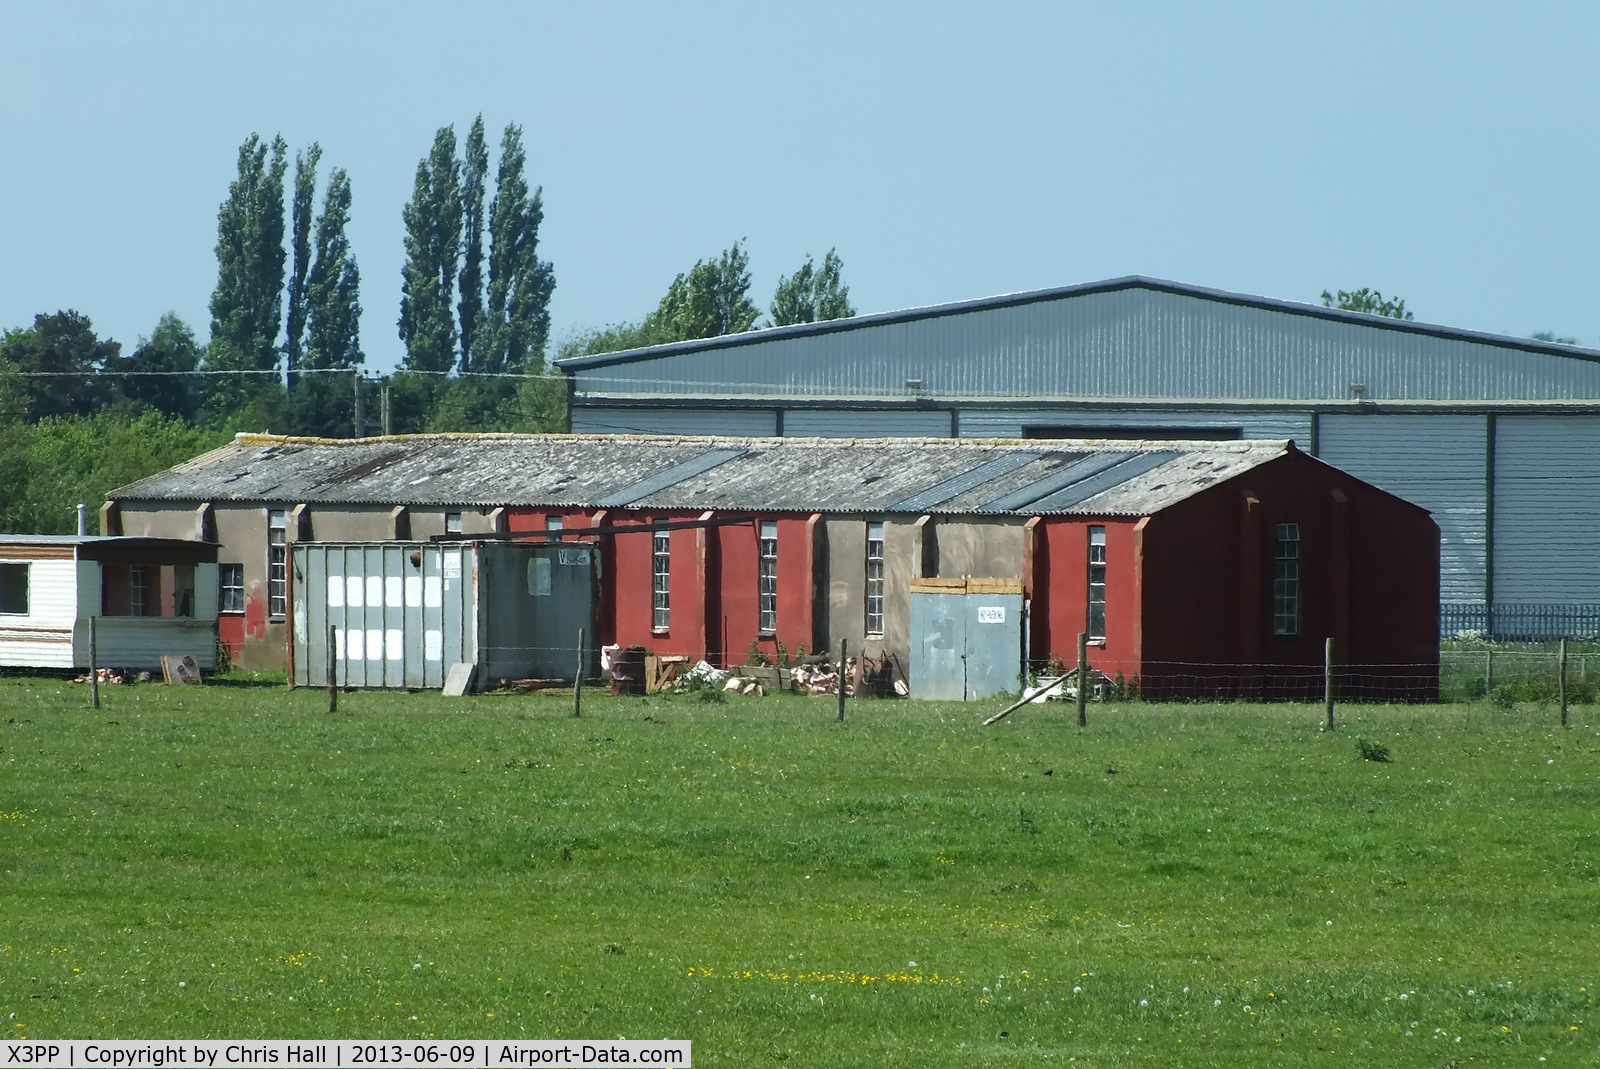 X3PP Airport - one of the surviving buildings in the technical area at the former RAF Peplow, which was also know as:	HMS Godwit II / RAF Child's Ercall / RNAS Peplow. It was in use between 1941 and 1949